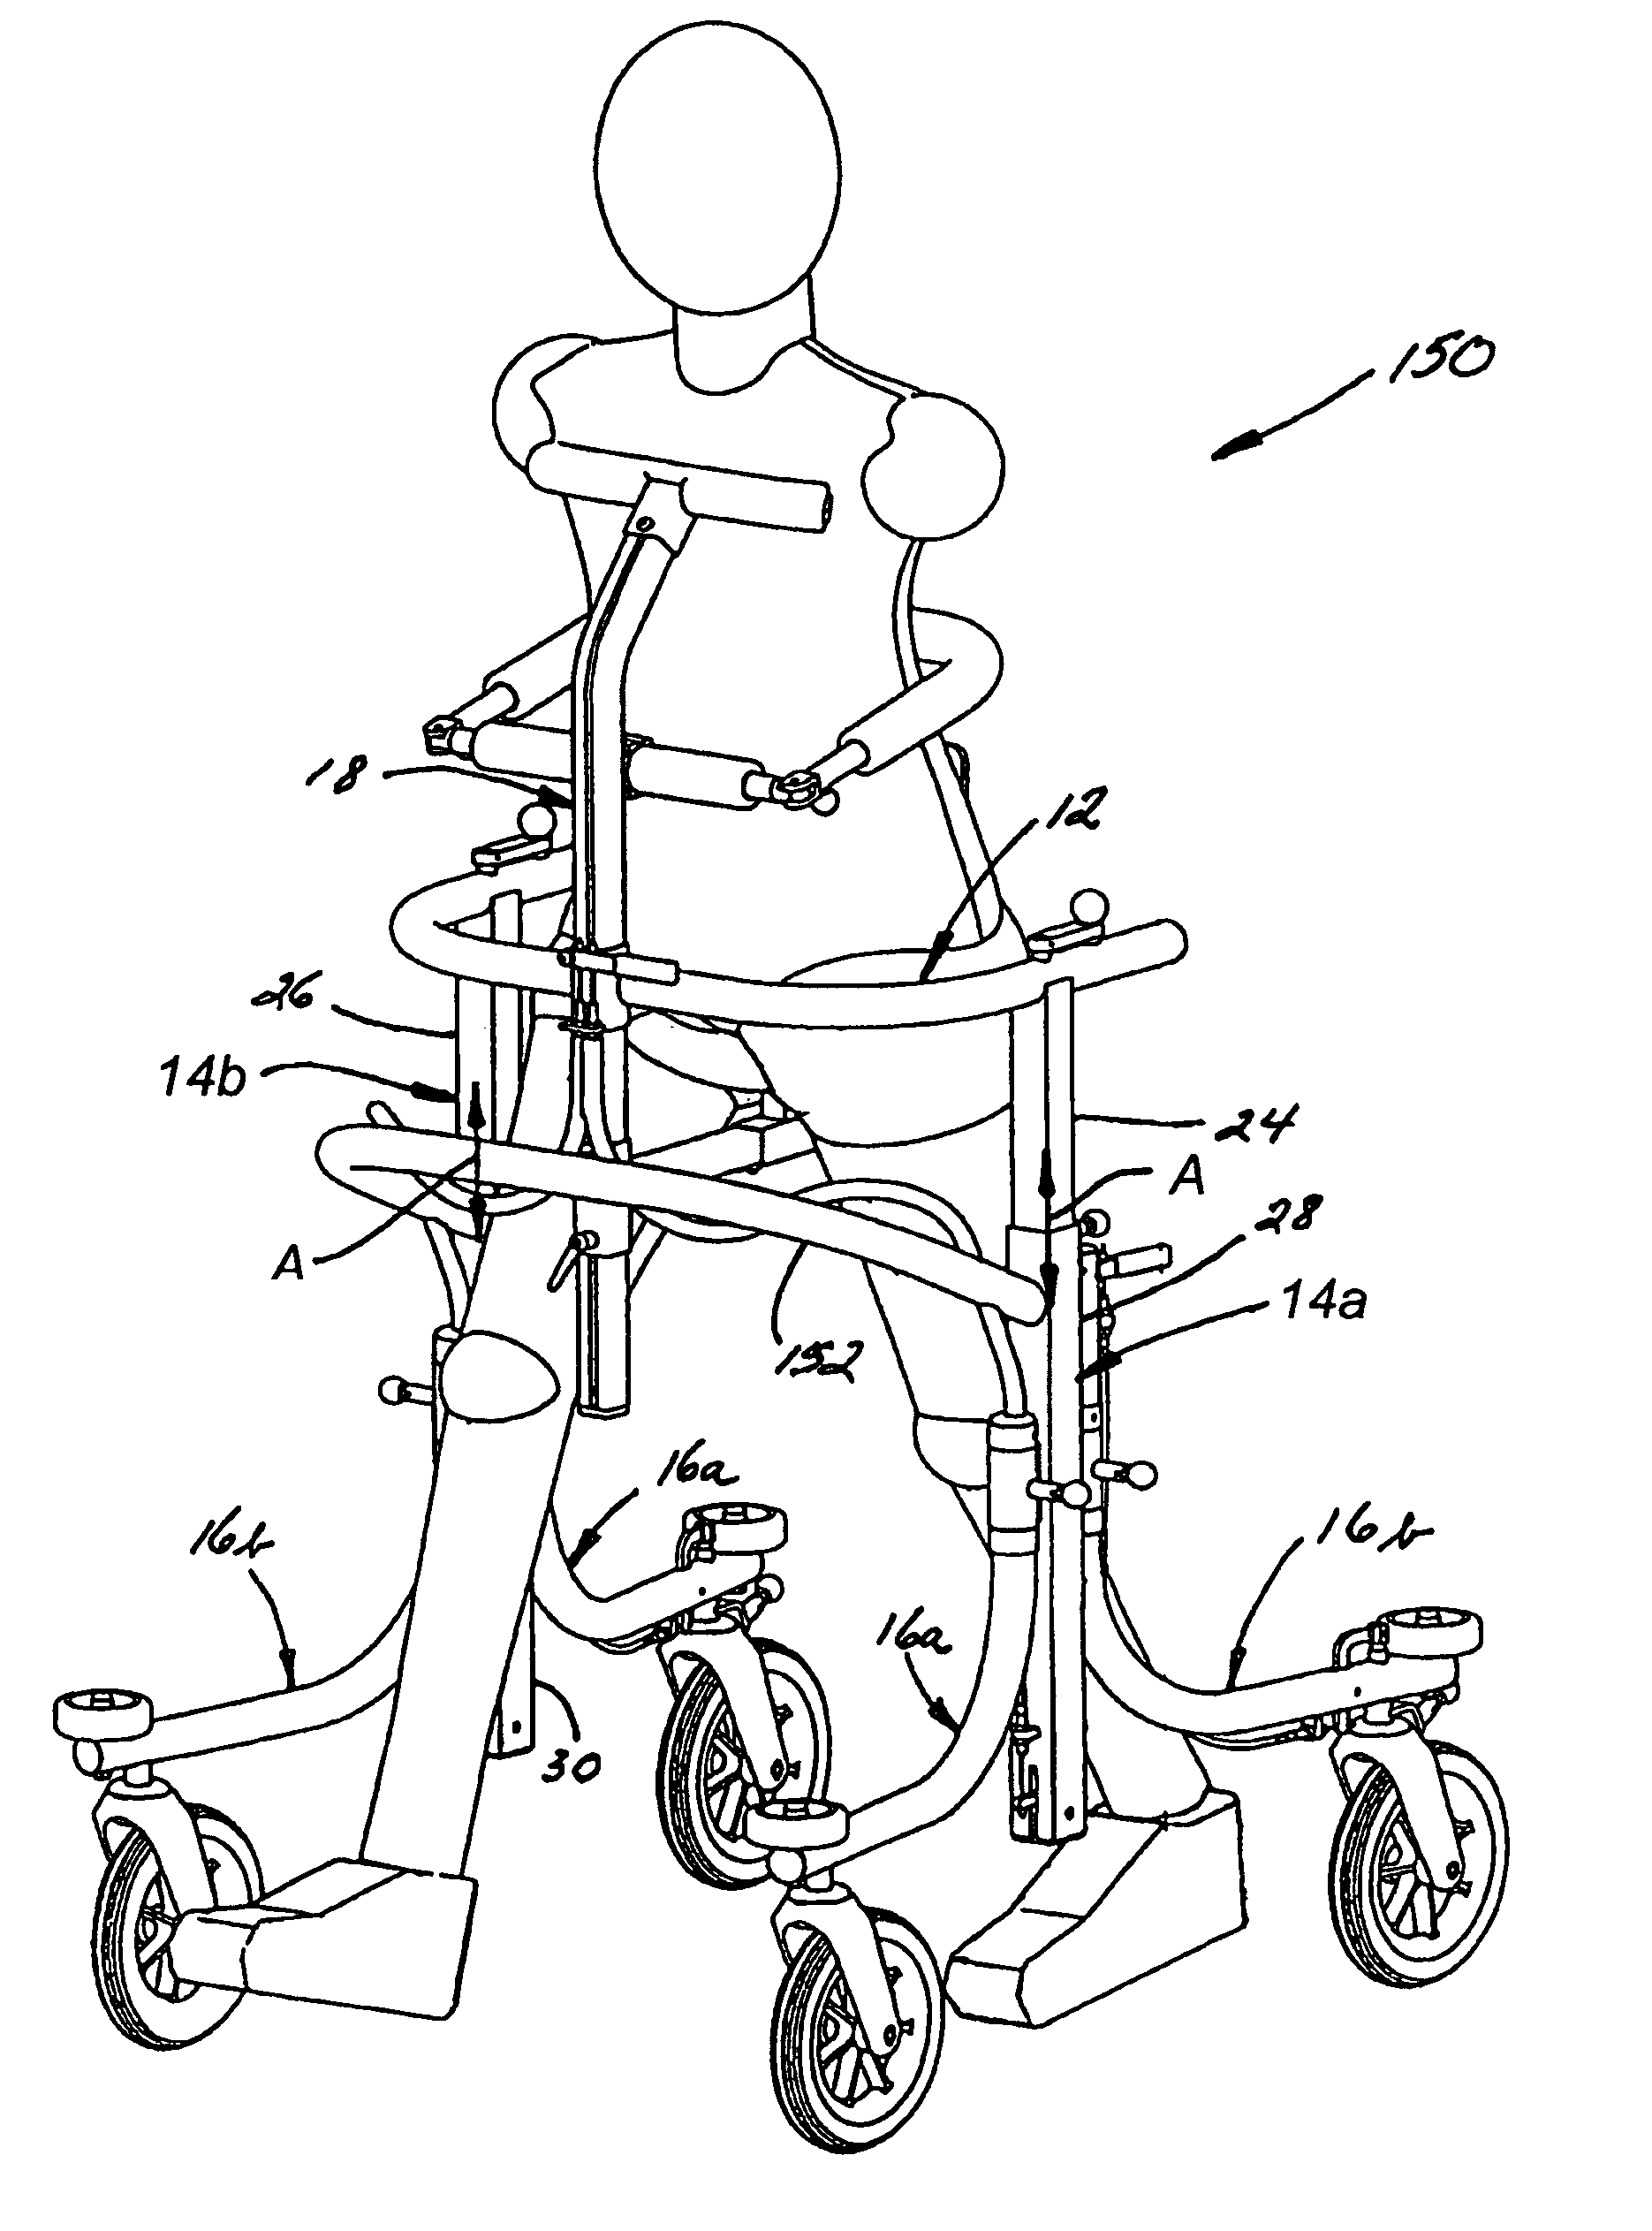 Assistive walking device